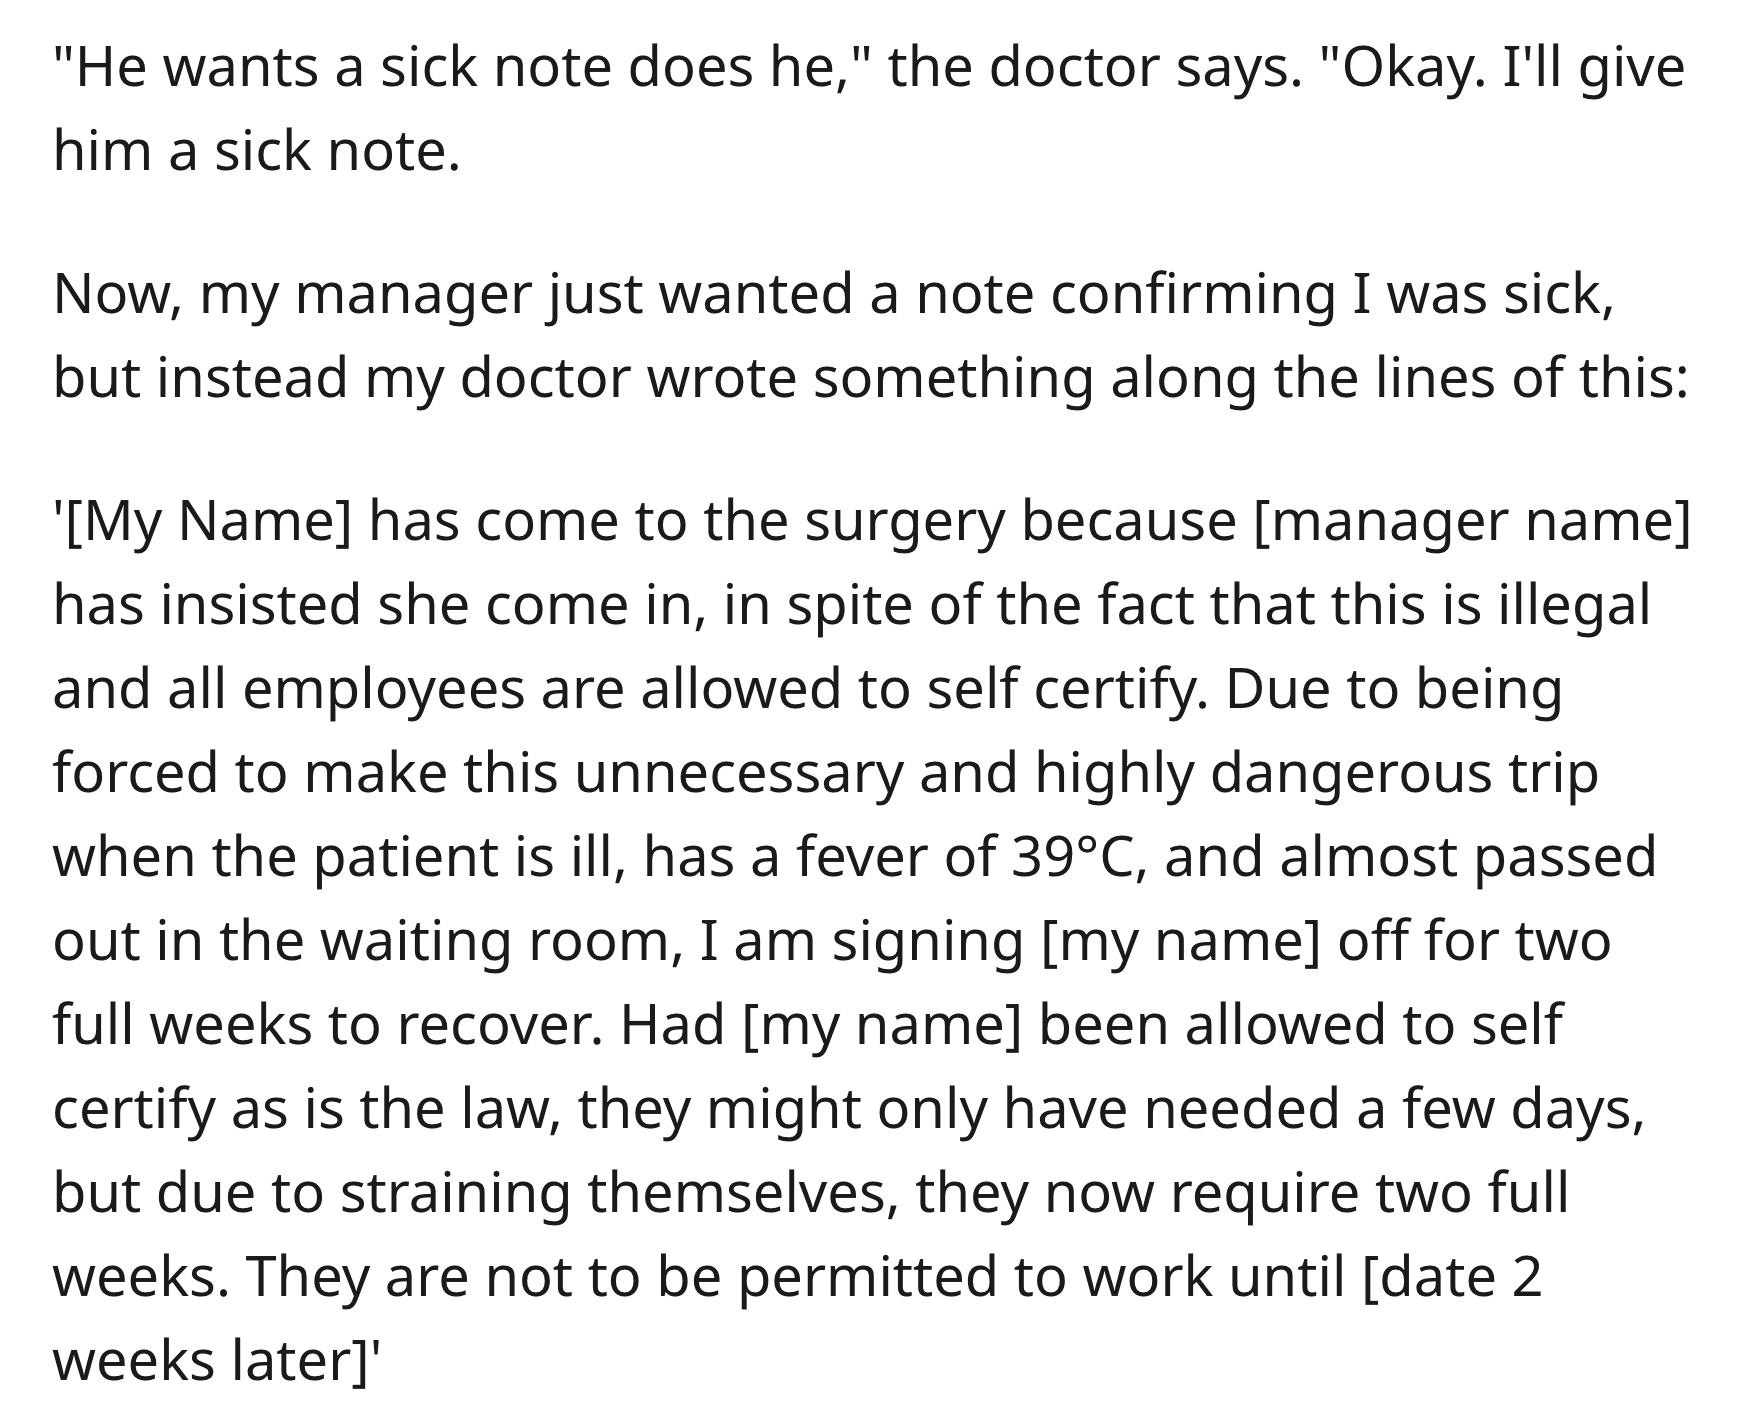 Boss Illegally Demands Doctor’s Note, So Doctor Recommends 2 Weeks Off - story writing on one morning i woke up and found myself famous -